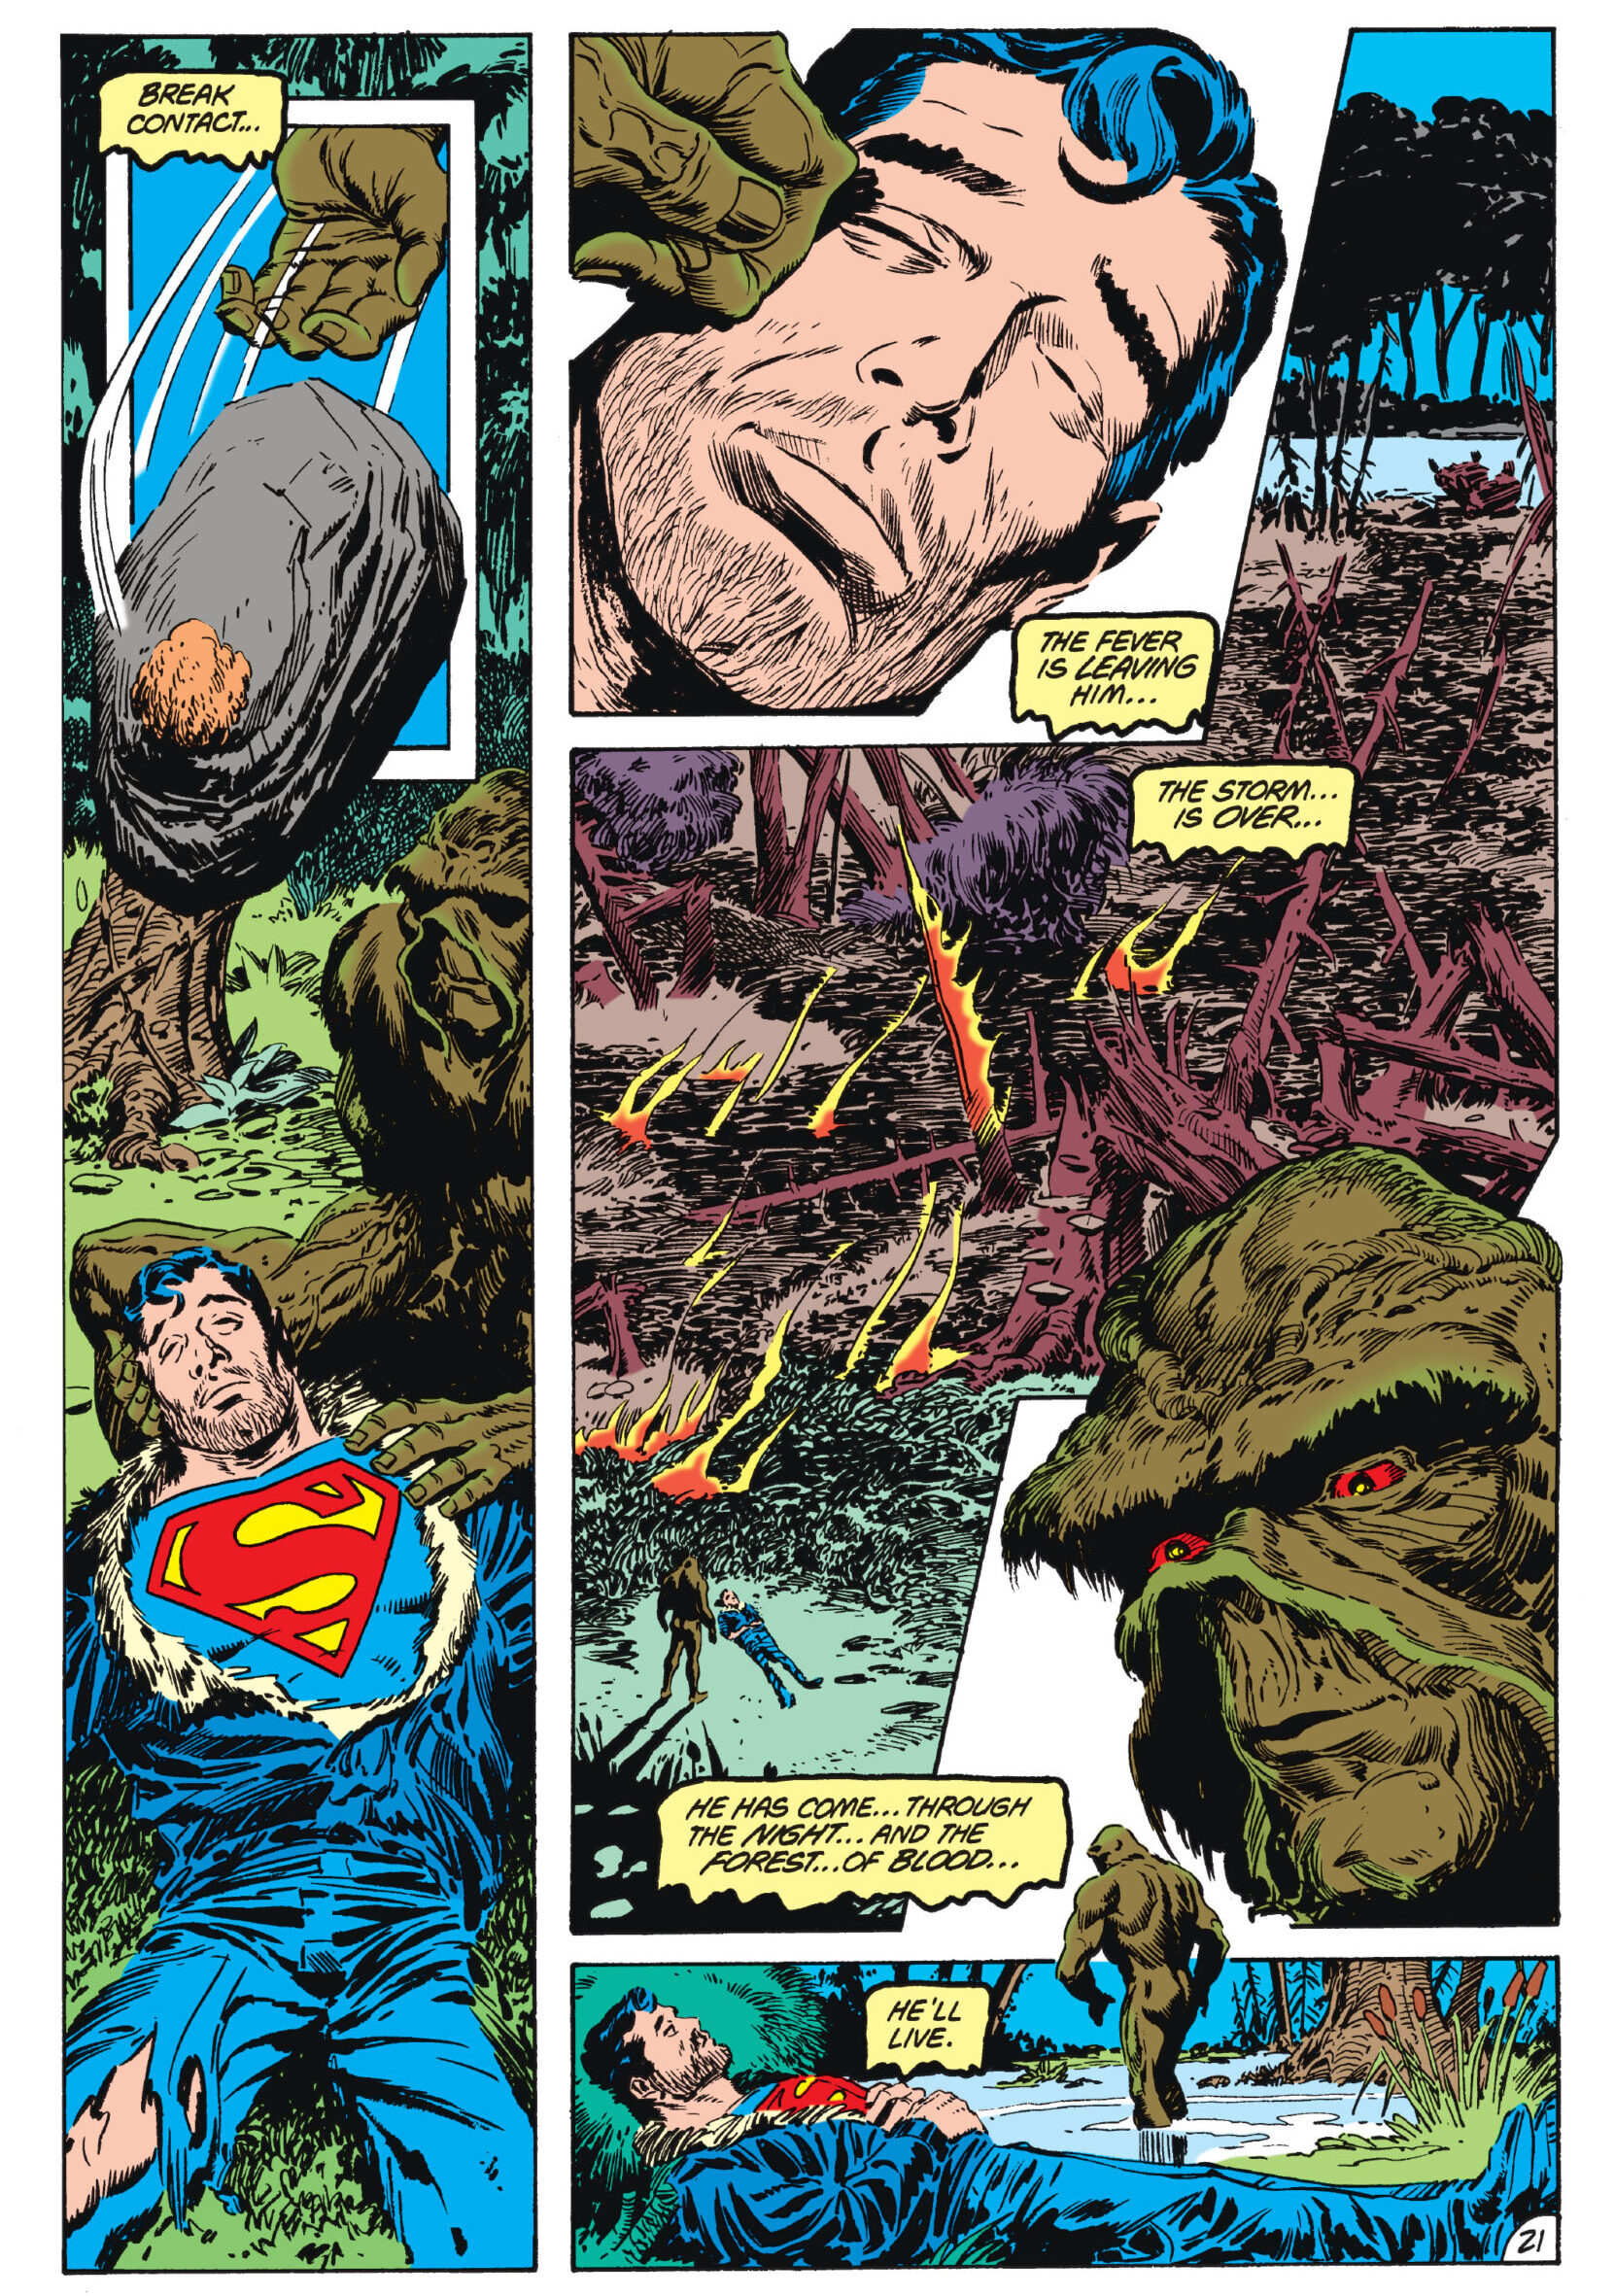 Swamp Thing saves Superman's life in The Saga of the Swamp Thing Vol. 2 #24 "Roots" (1984), Marvel Comics. Words by Alan Moore, art by Steve Bissette, John Totleben, Tatjana Wood, and John Costanza.